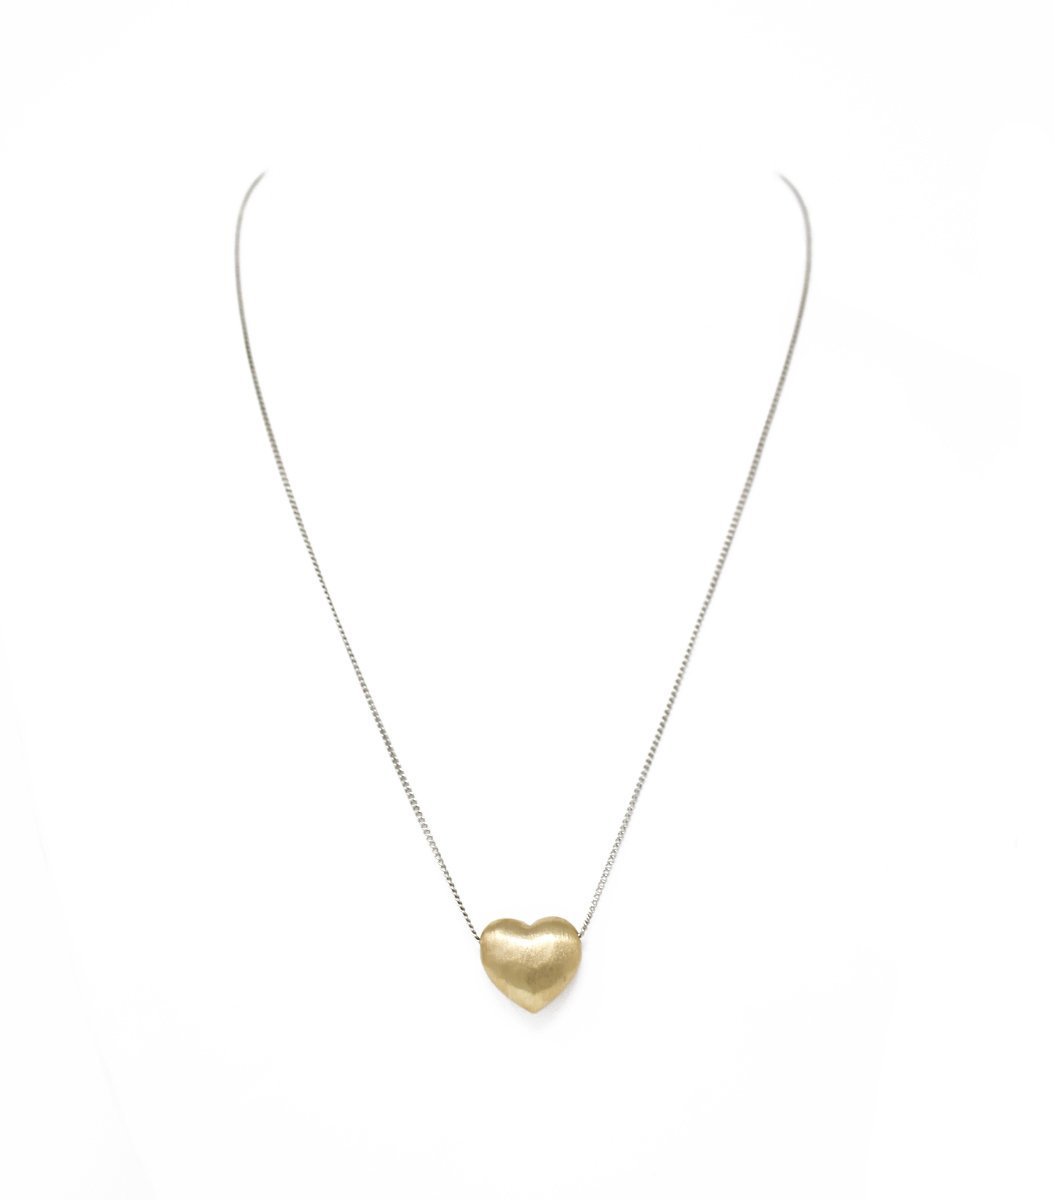 Puffy Heart Necklace - LAURA CANTU JEWELRY US